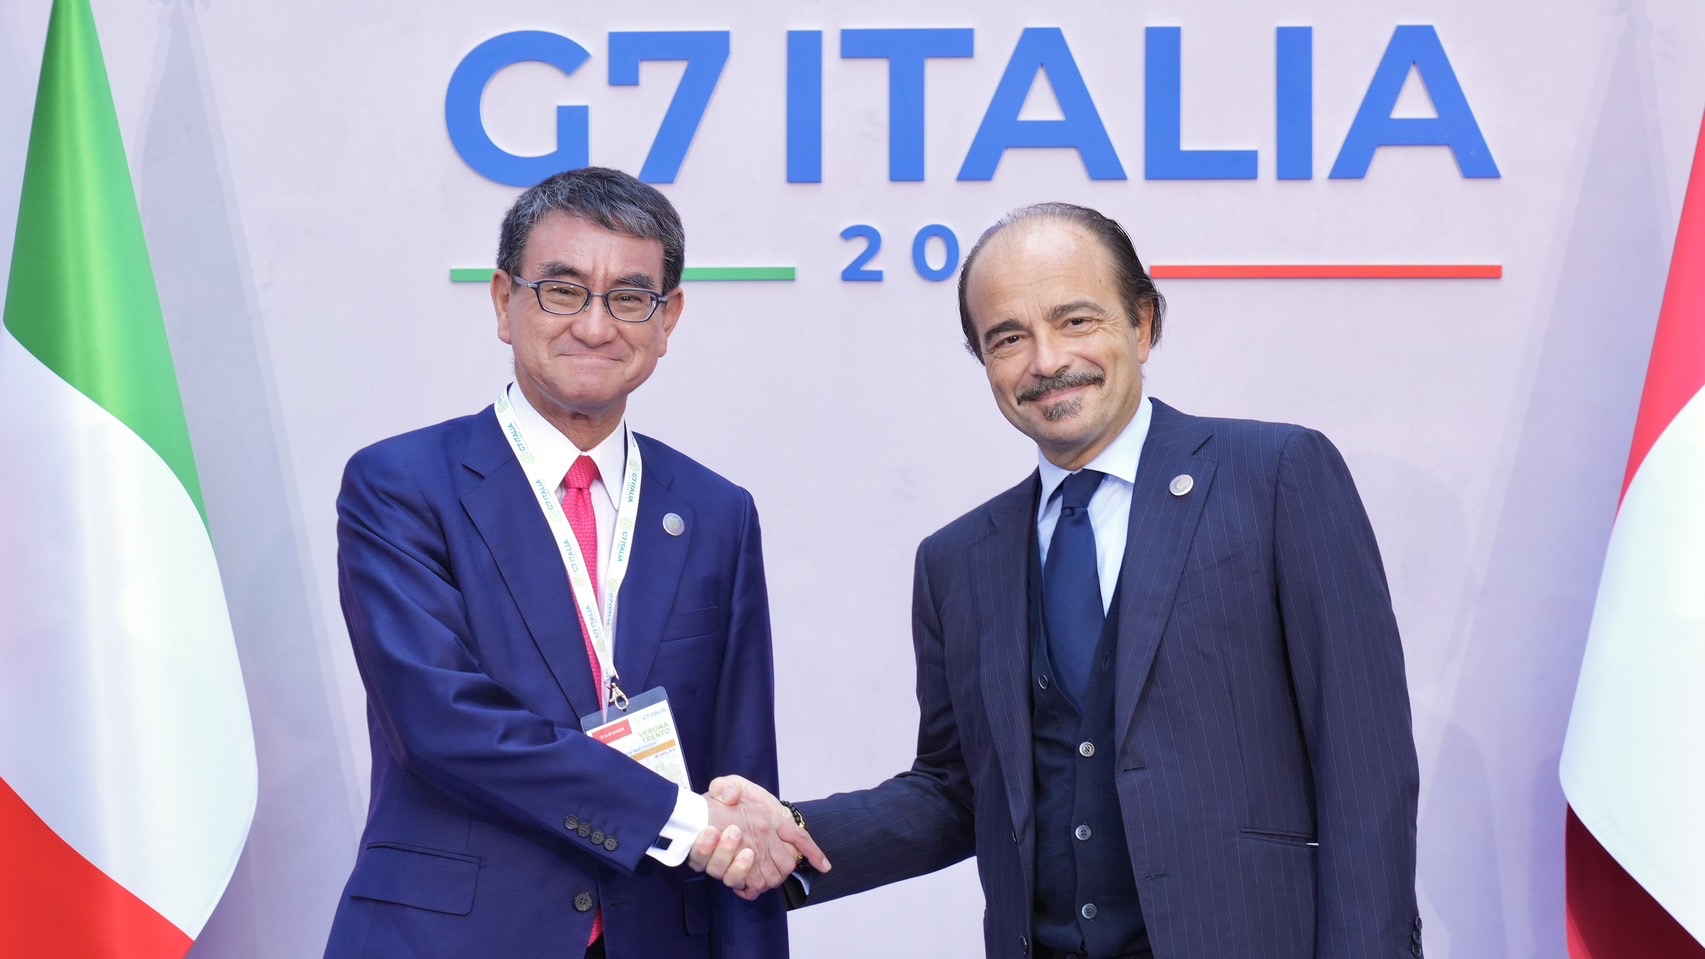 Minister Kono shakes hands with Mr. Butti, Undersecretary to the Presidency of the Council of Ministers of Italy. Minister Kono stands on the left.